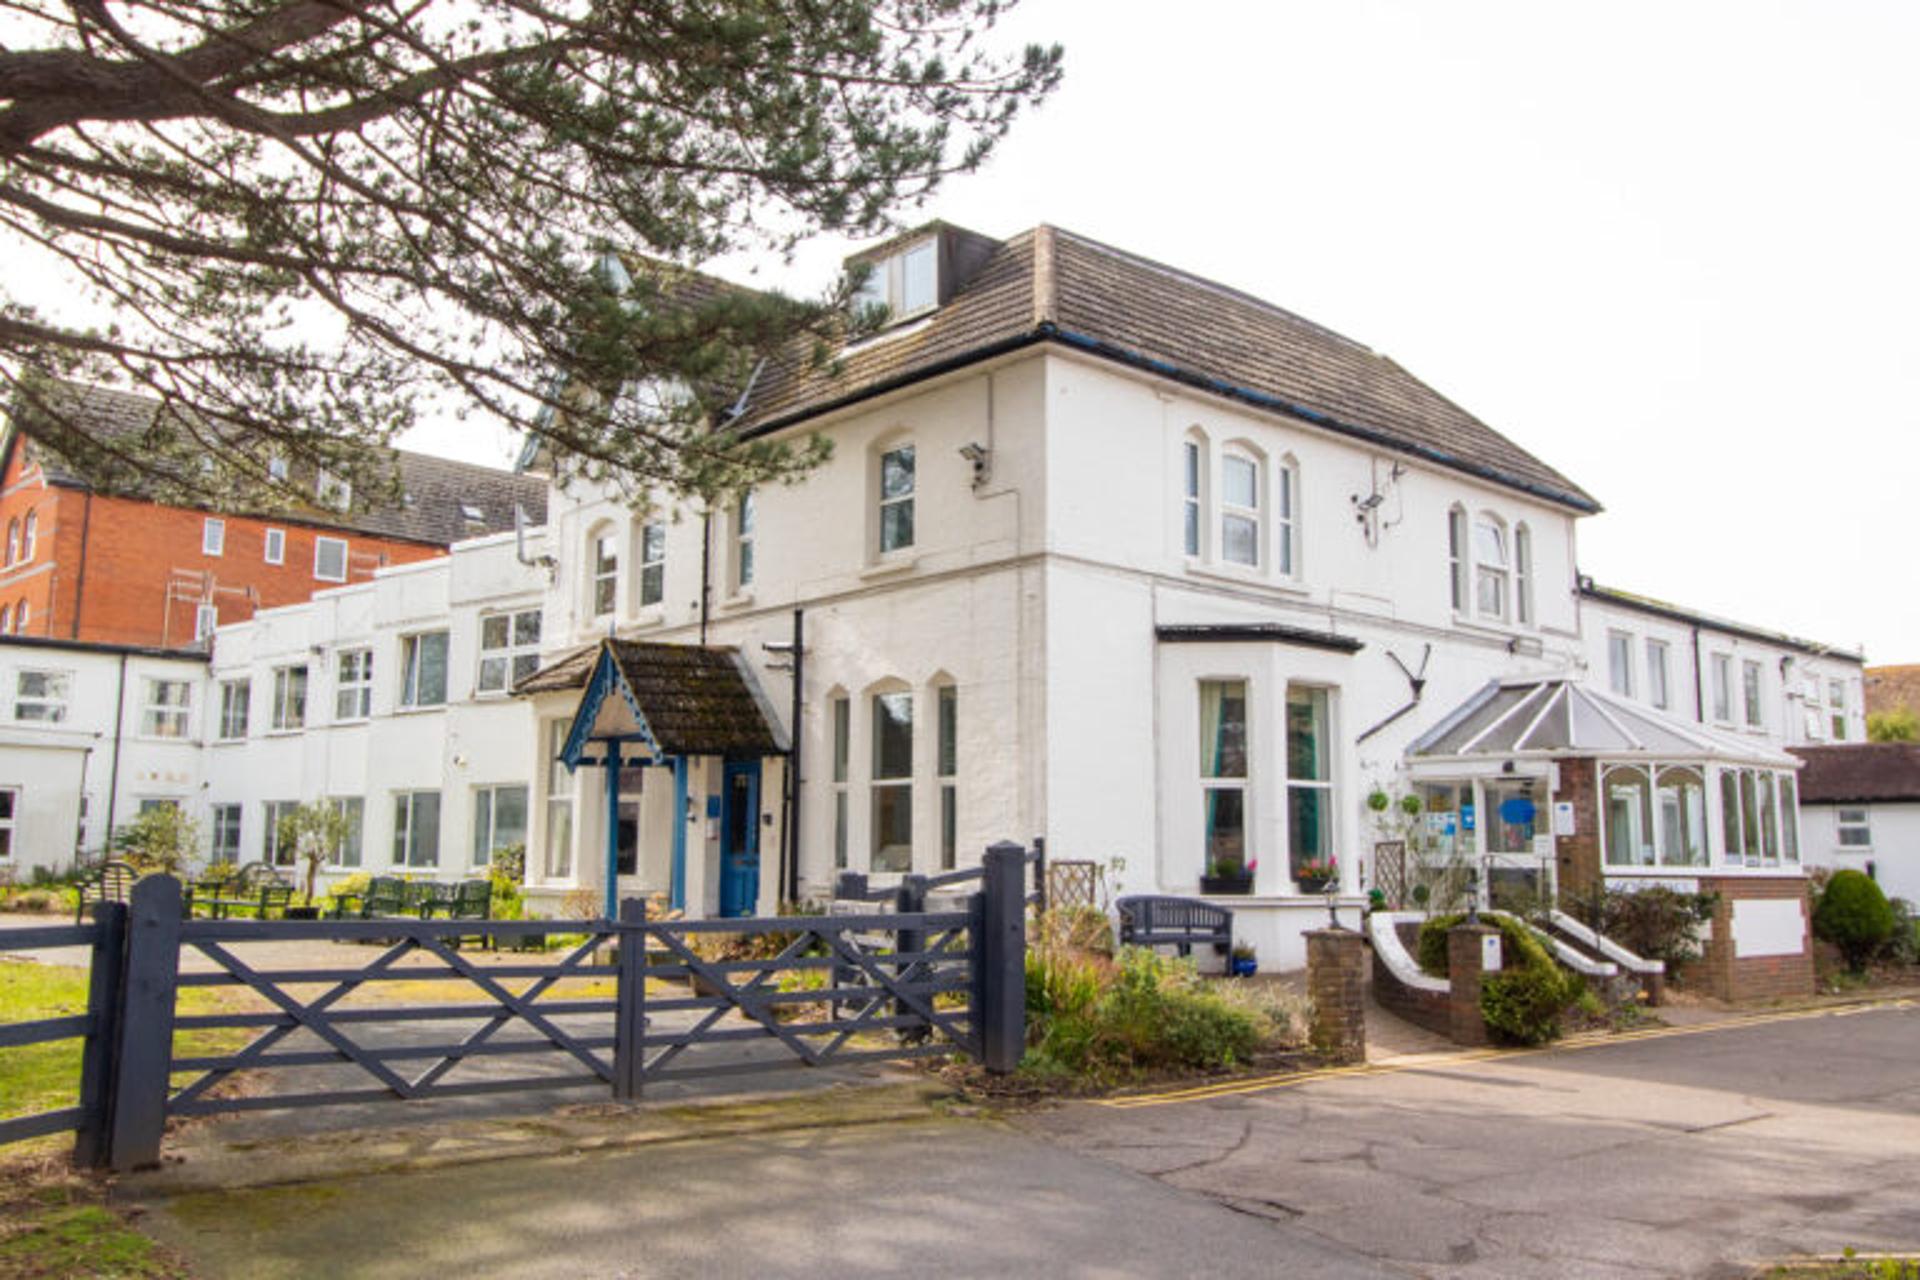 South East care home operator acquired